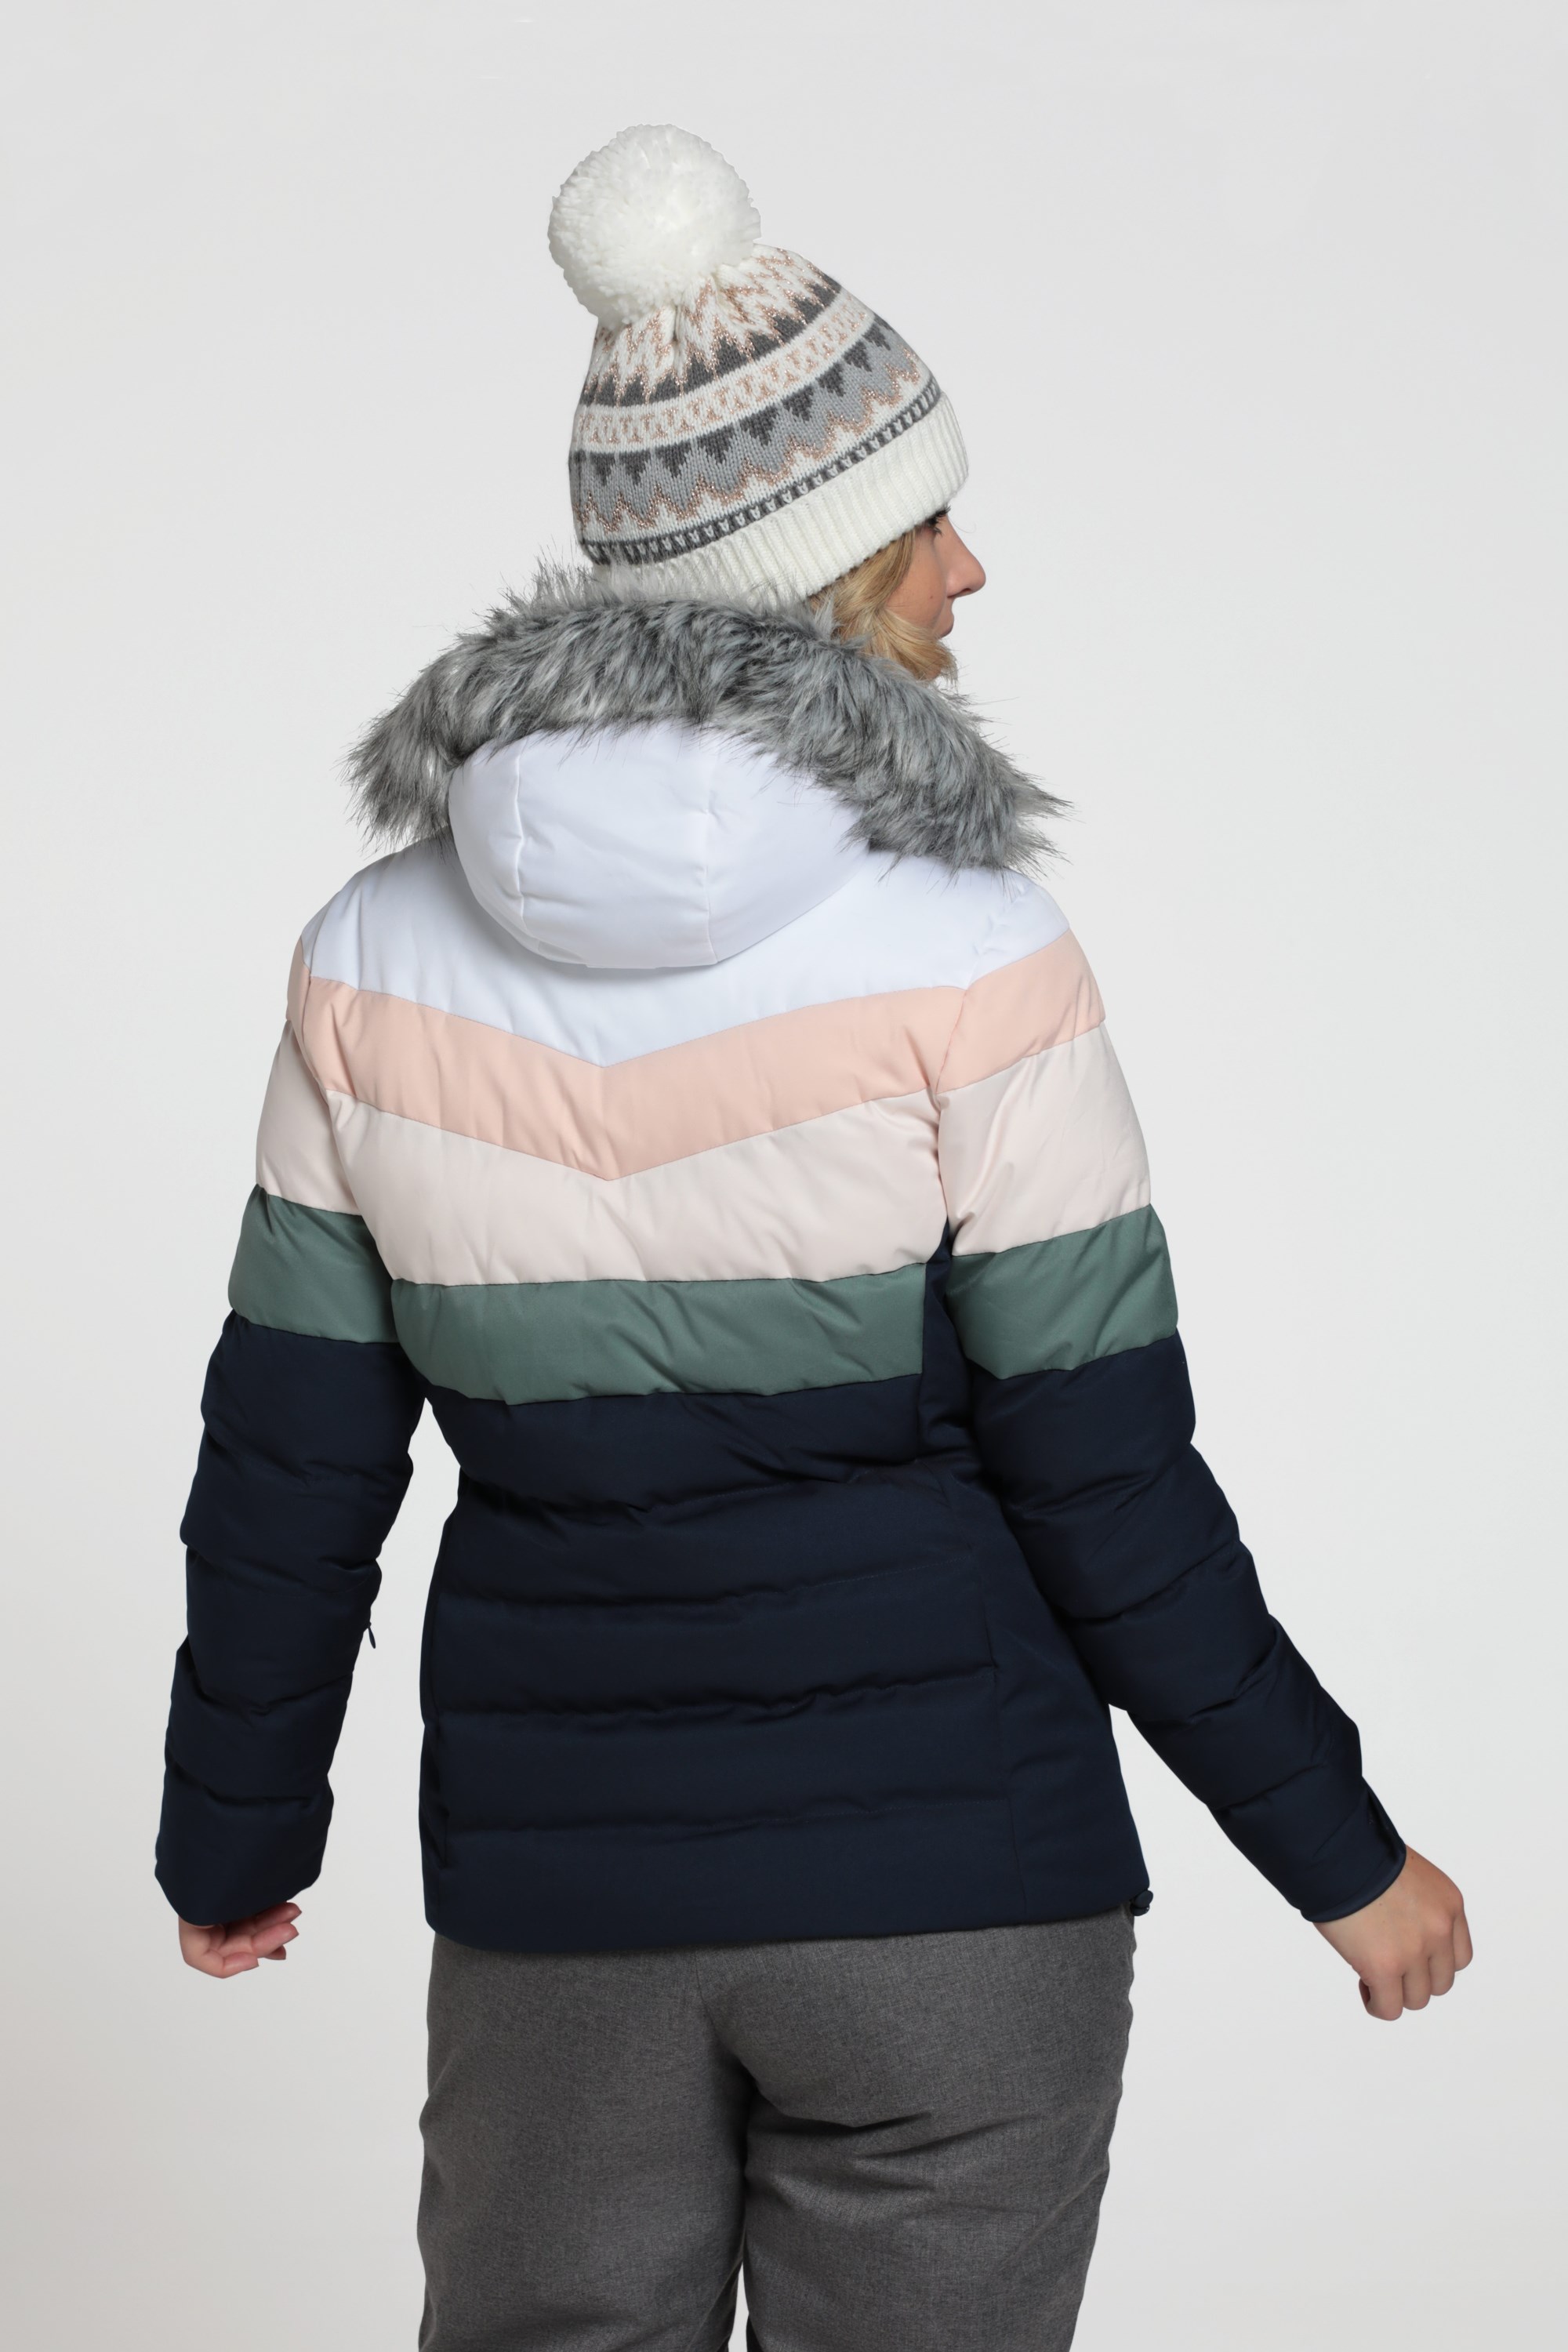 Avalanche Printed Womens Insulated Ski Jacket